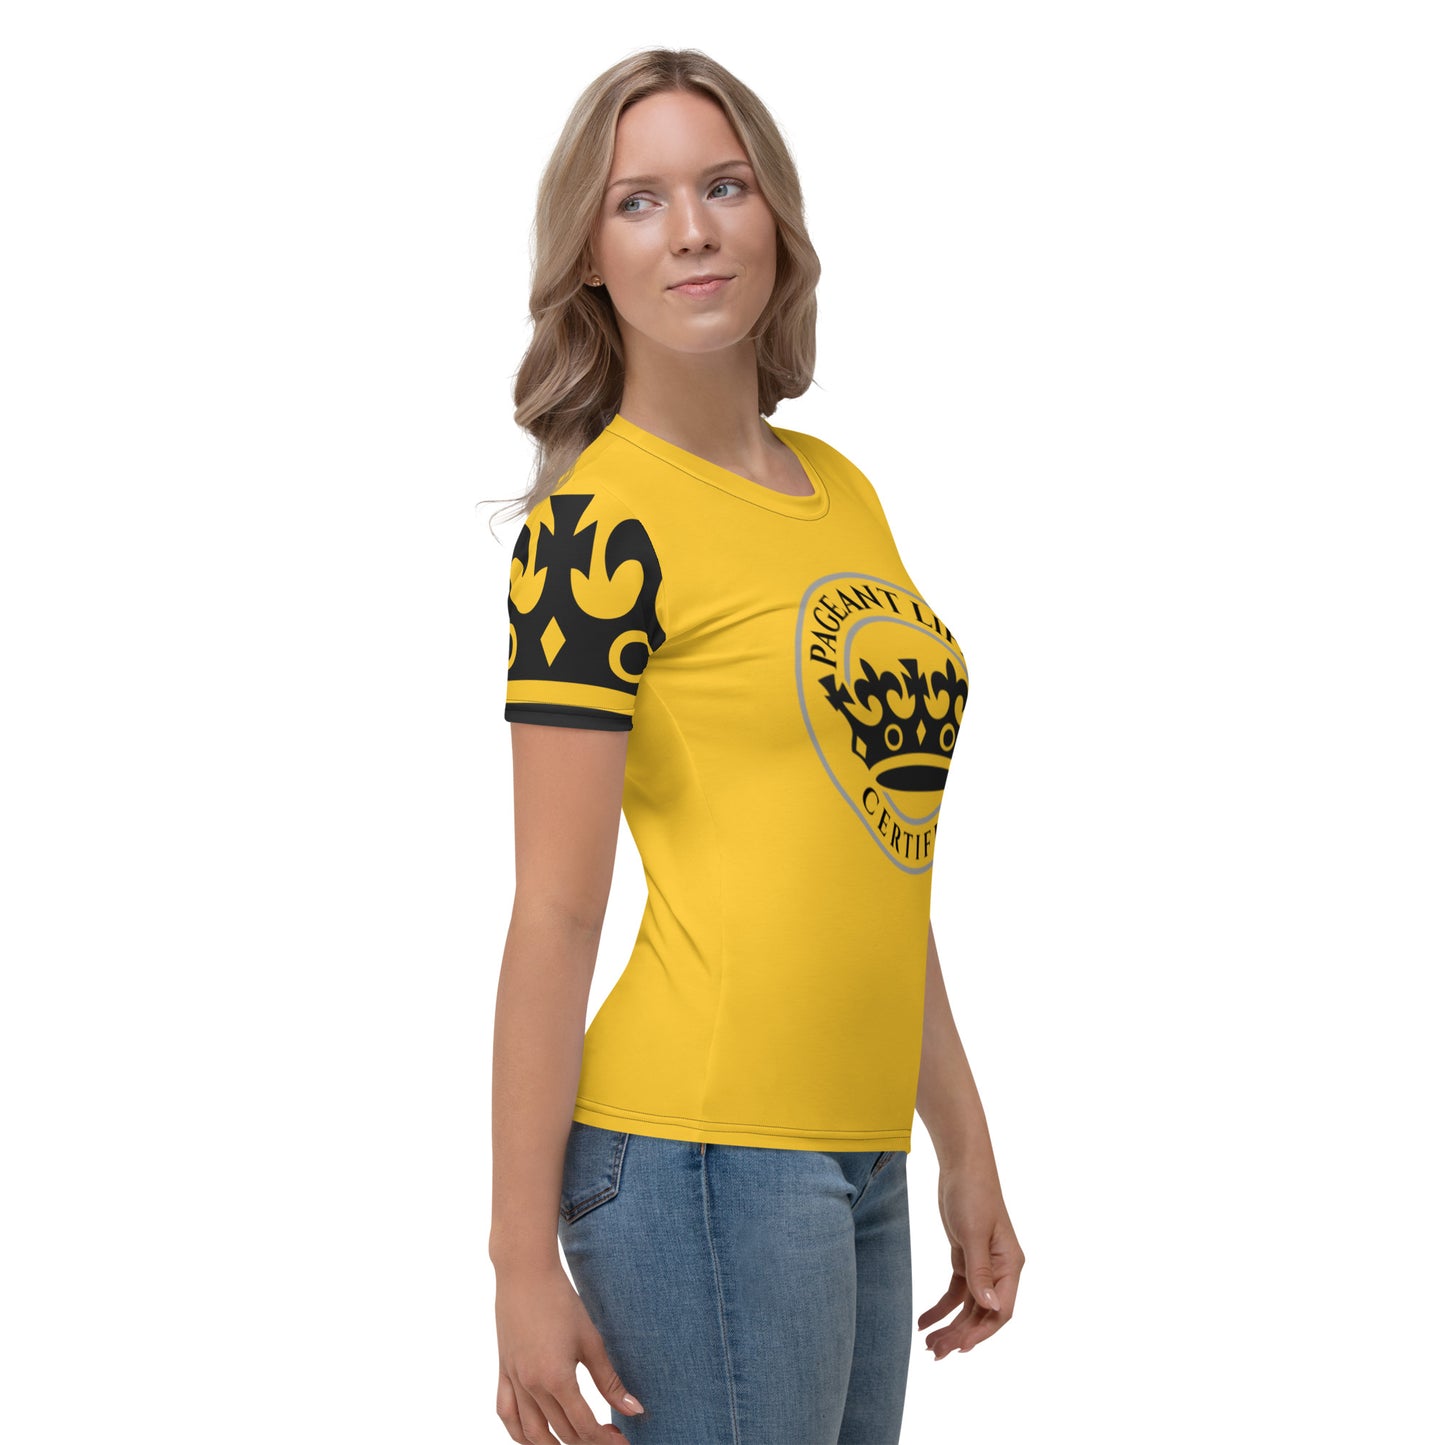 Black and Yellow Pageant Life Certified Women's T-shirt